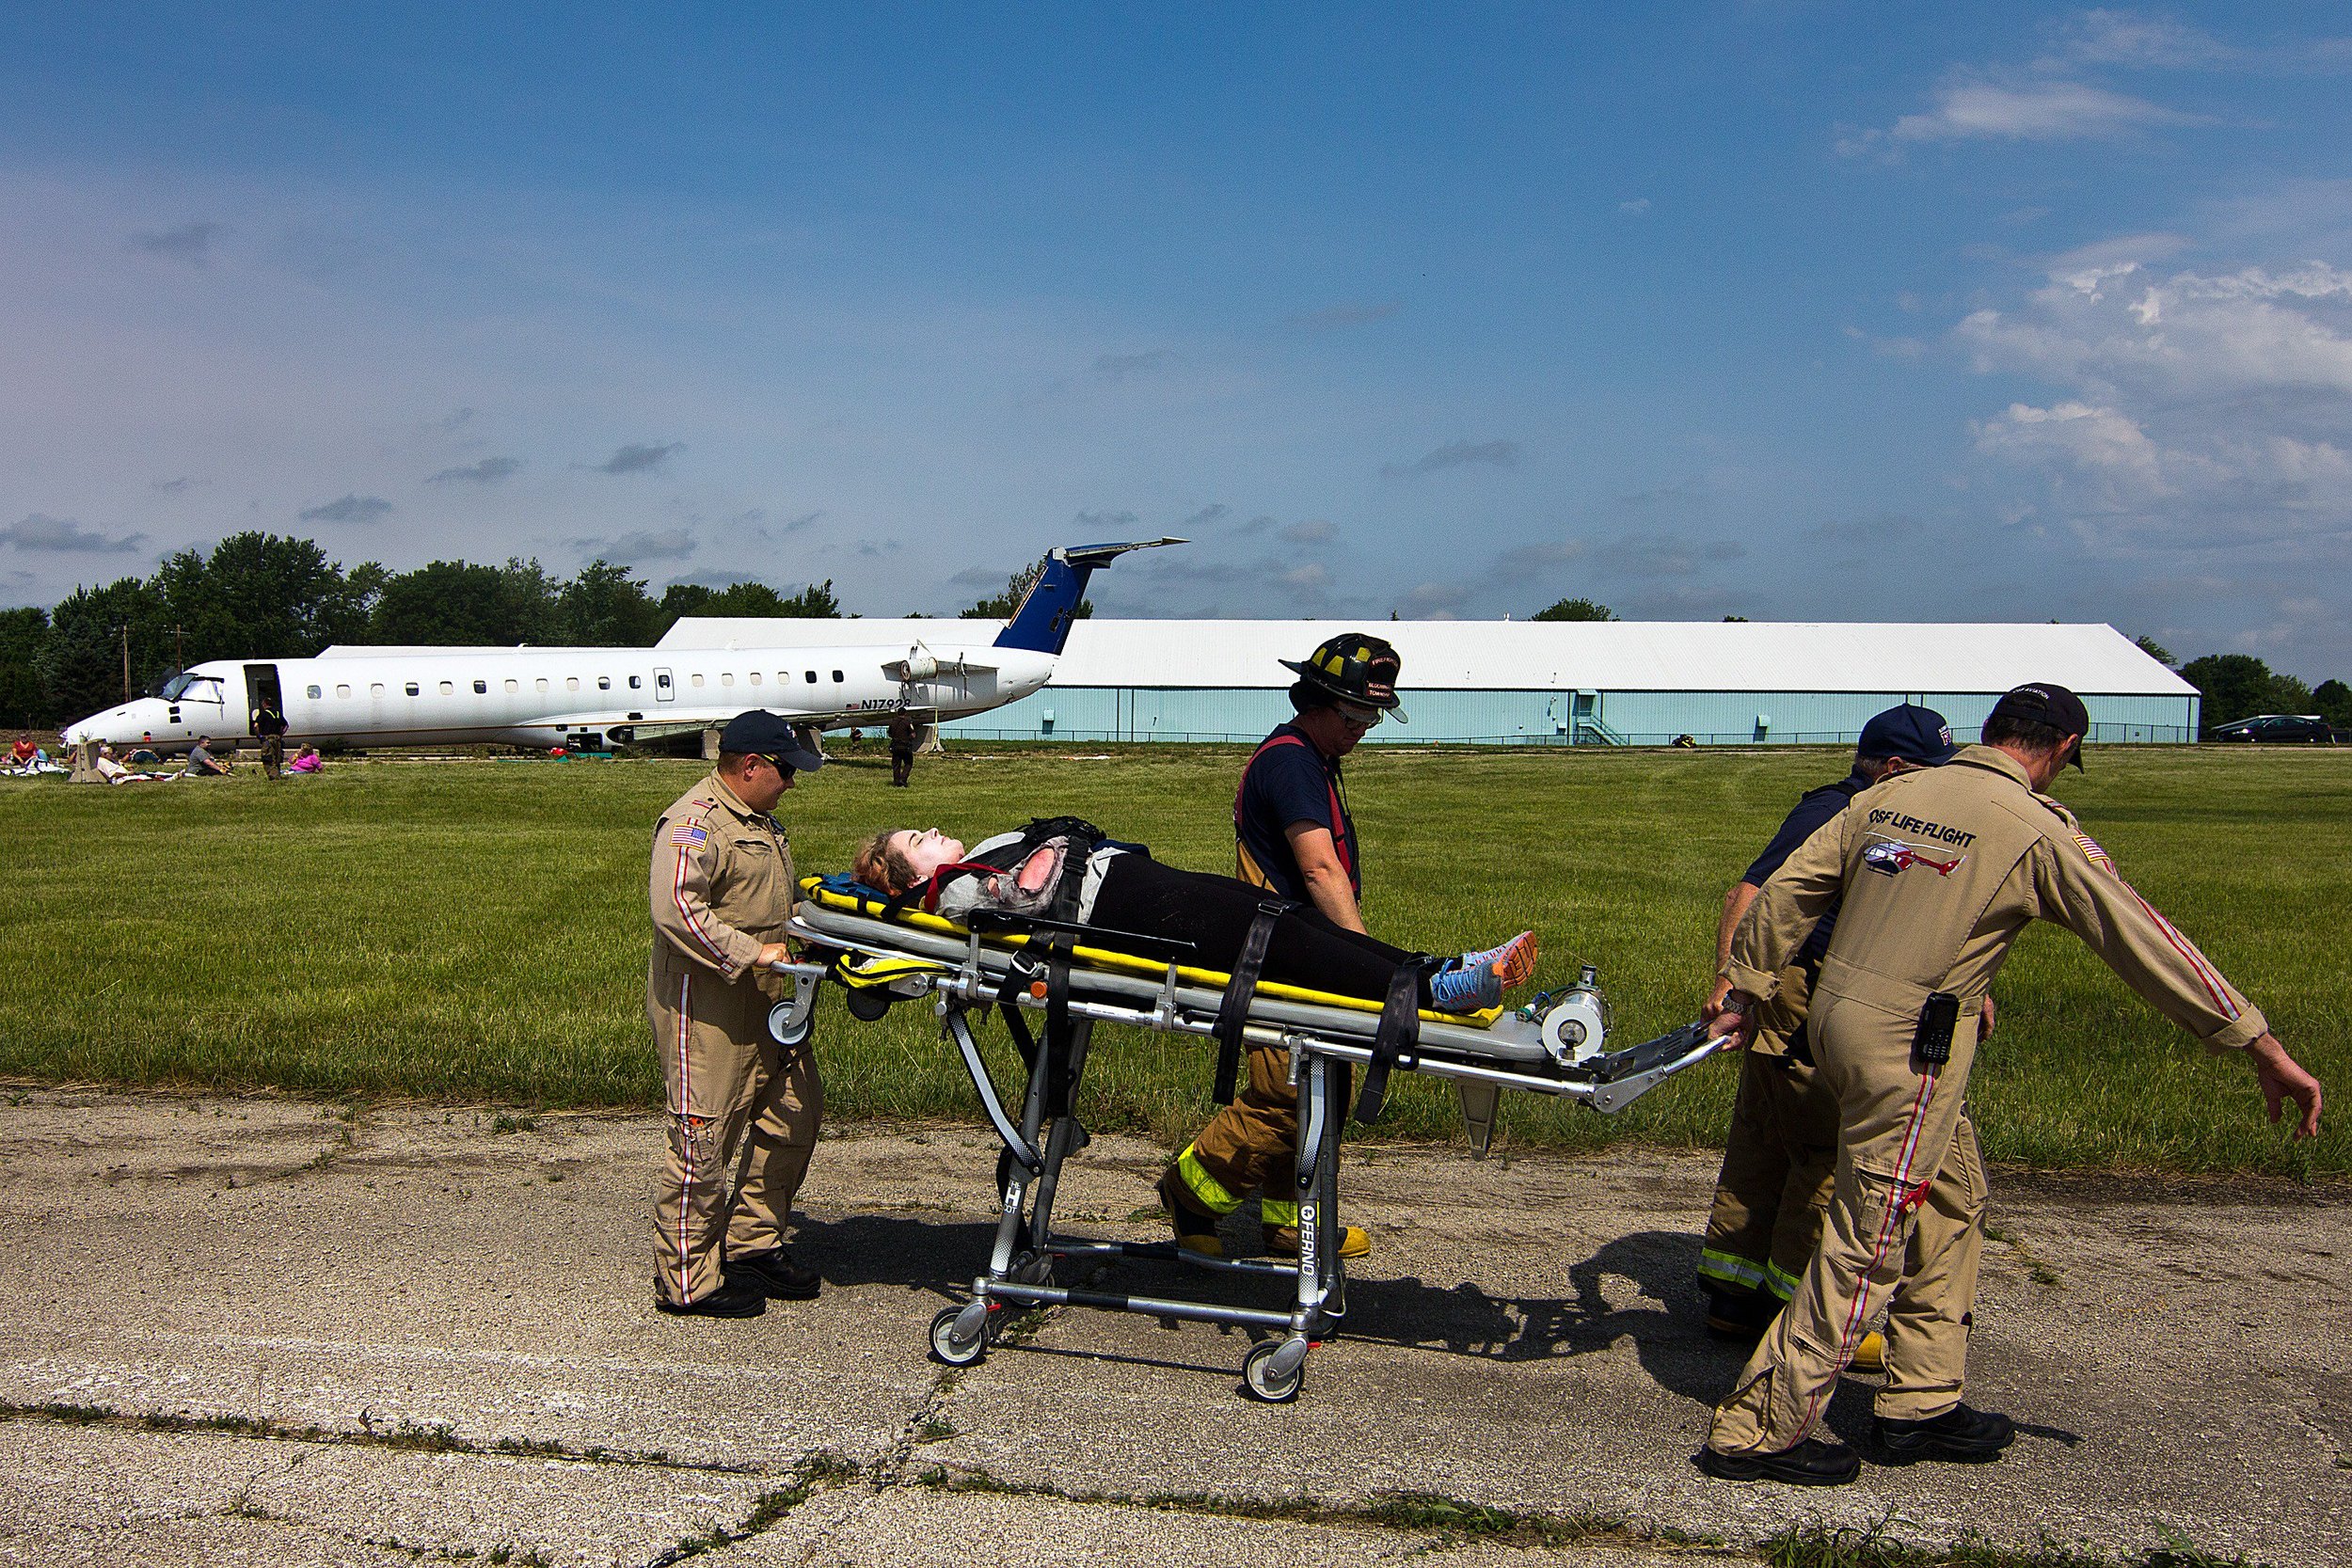  Emergency personnel wheel a “victim” away from a mock airplane crash during a full-scale emergency drill Saturday, June 22, 2019, in Bloomington, Illinois. Central Illinois Regional Airport has to complete the drill, implementing its Airport Emergen